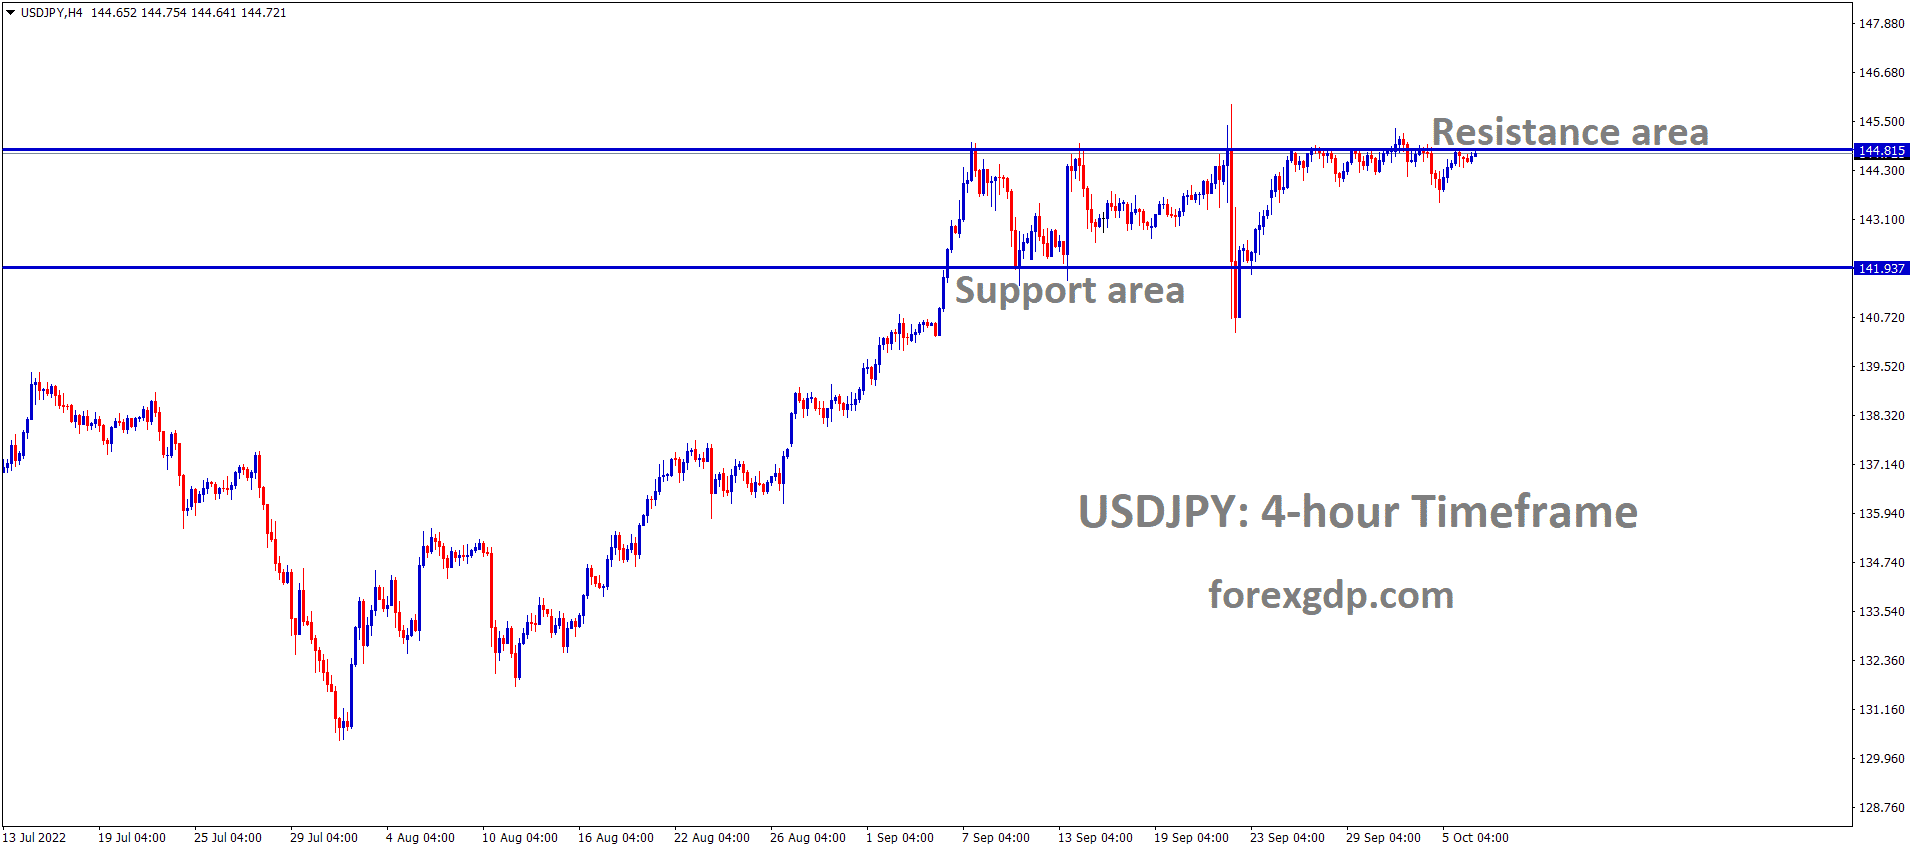 USDJPY is moving in the Box pattern and the market has reached the resistance area of the pattern 2